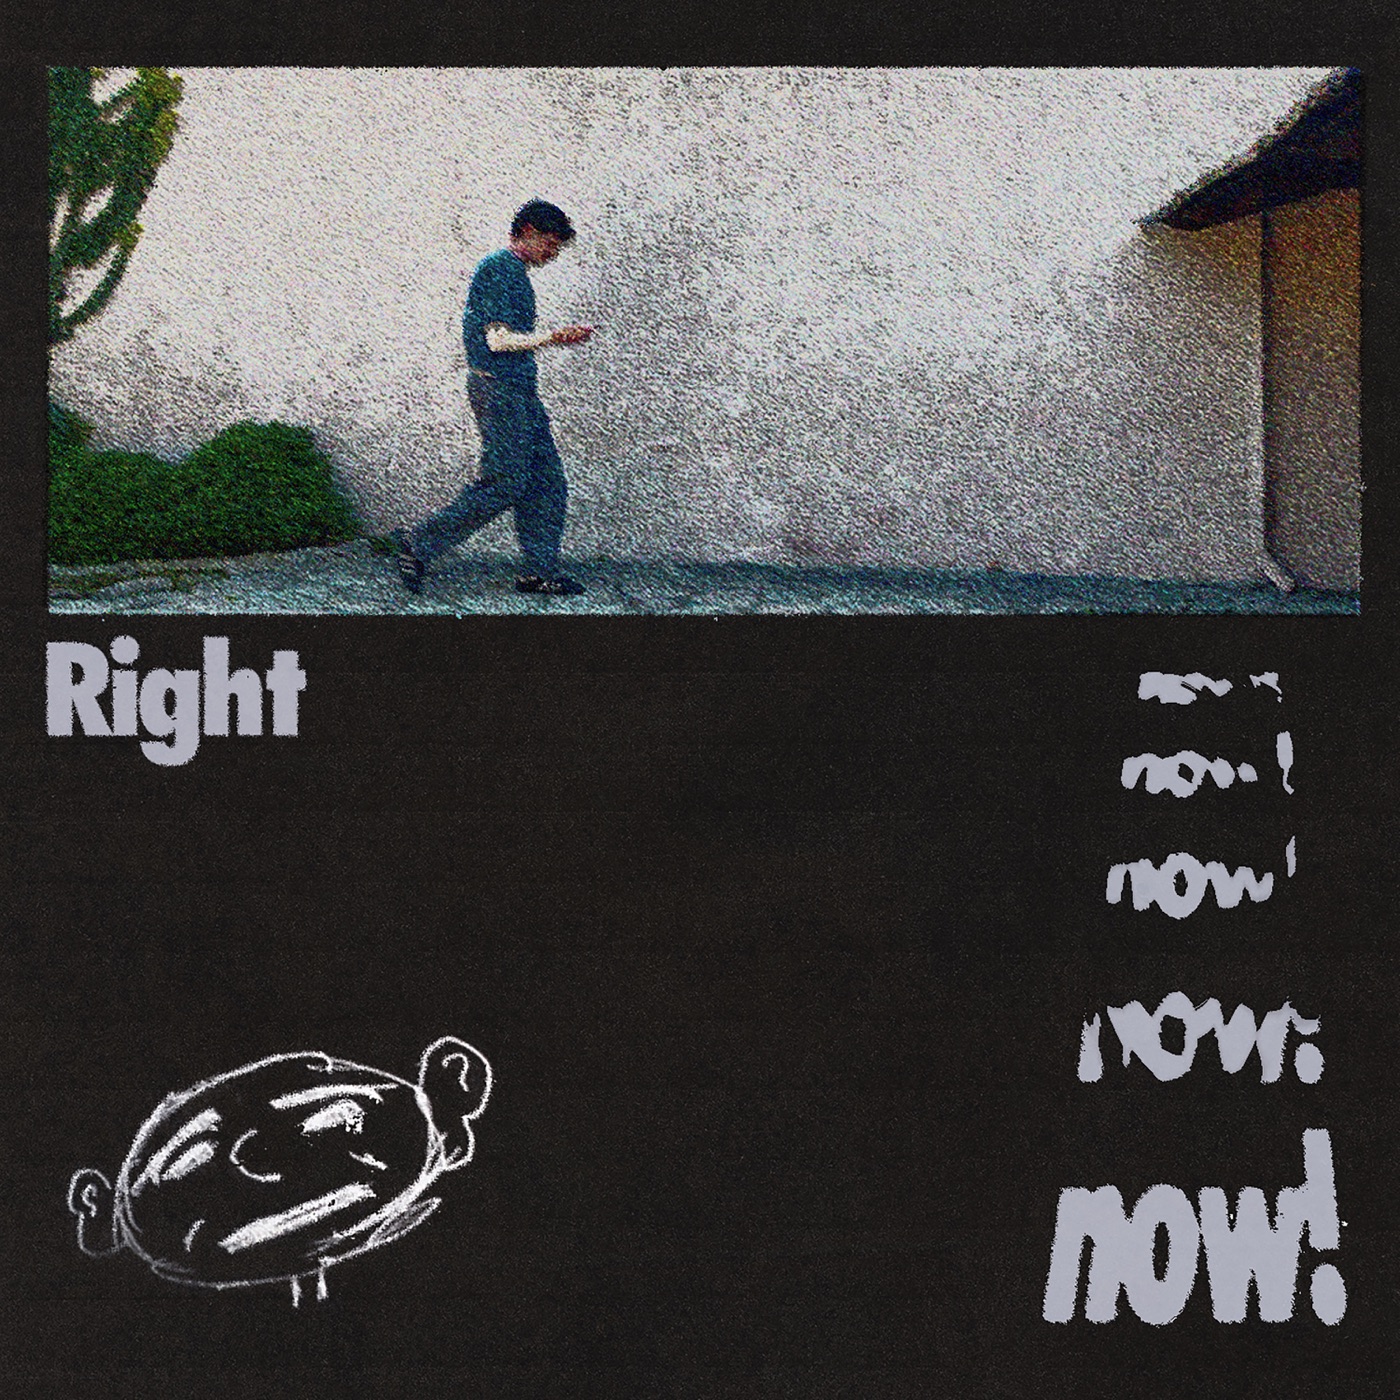 Right now! by Johnny Yukon